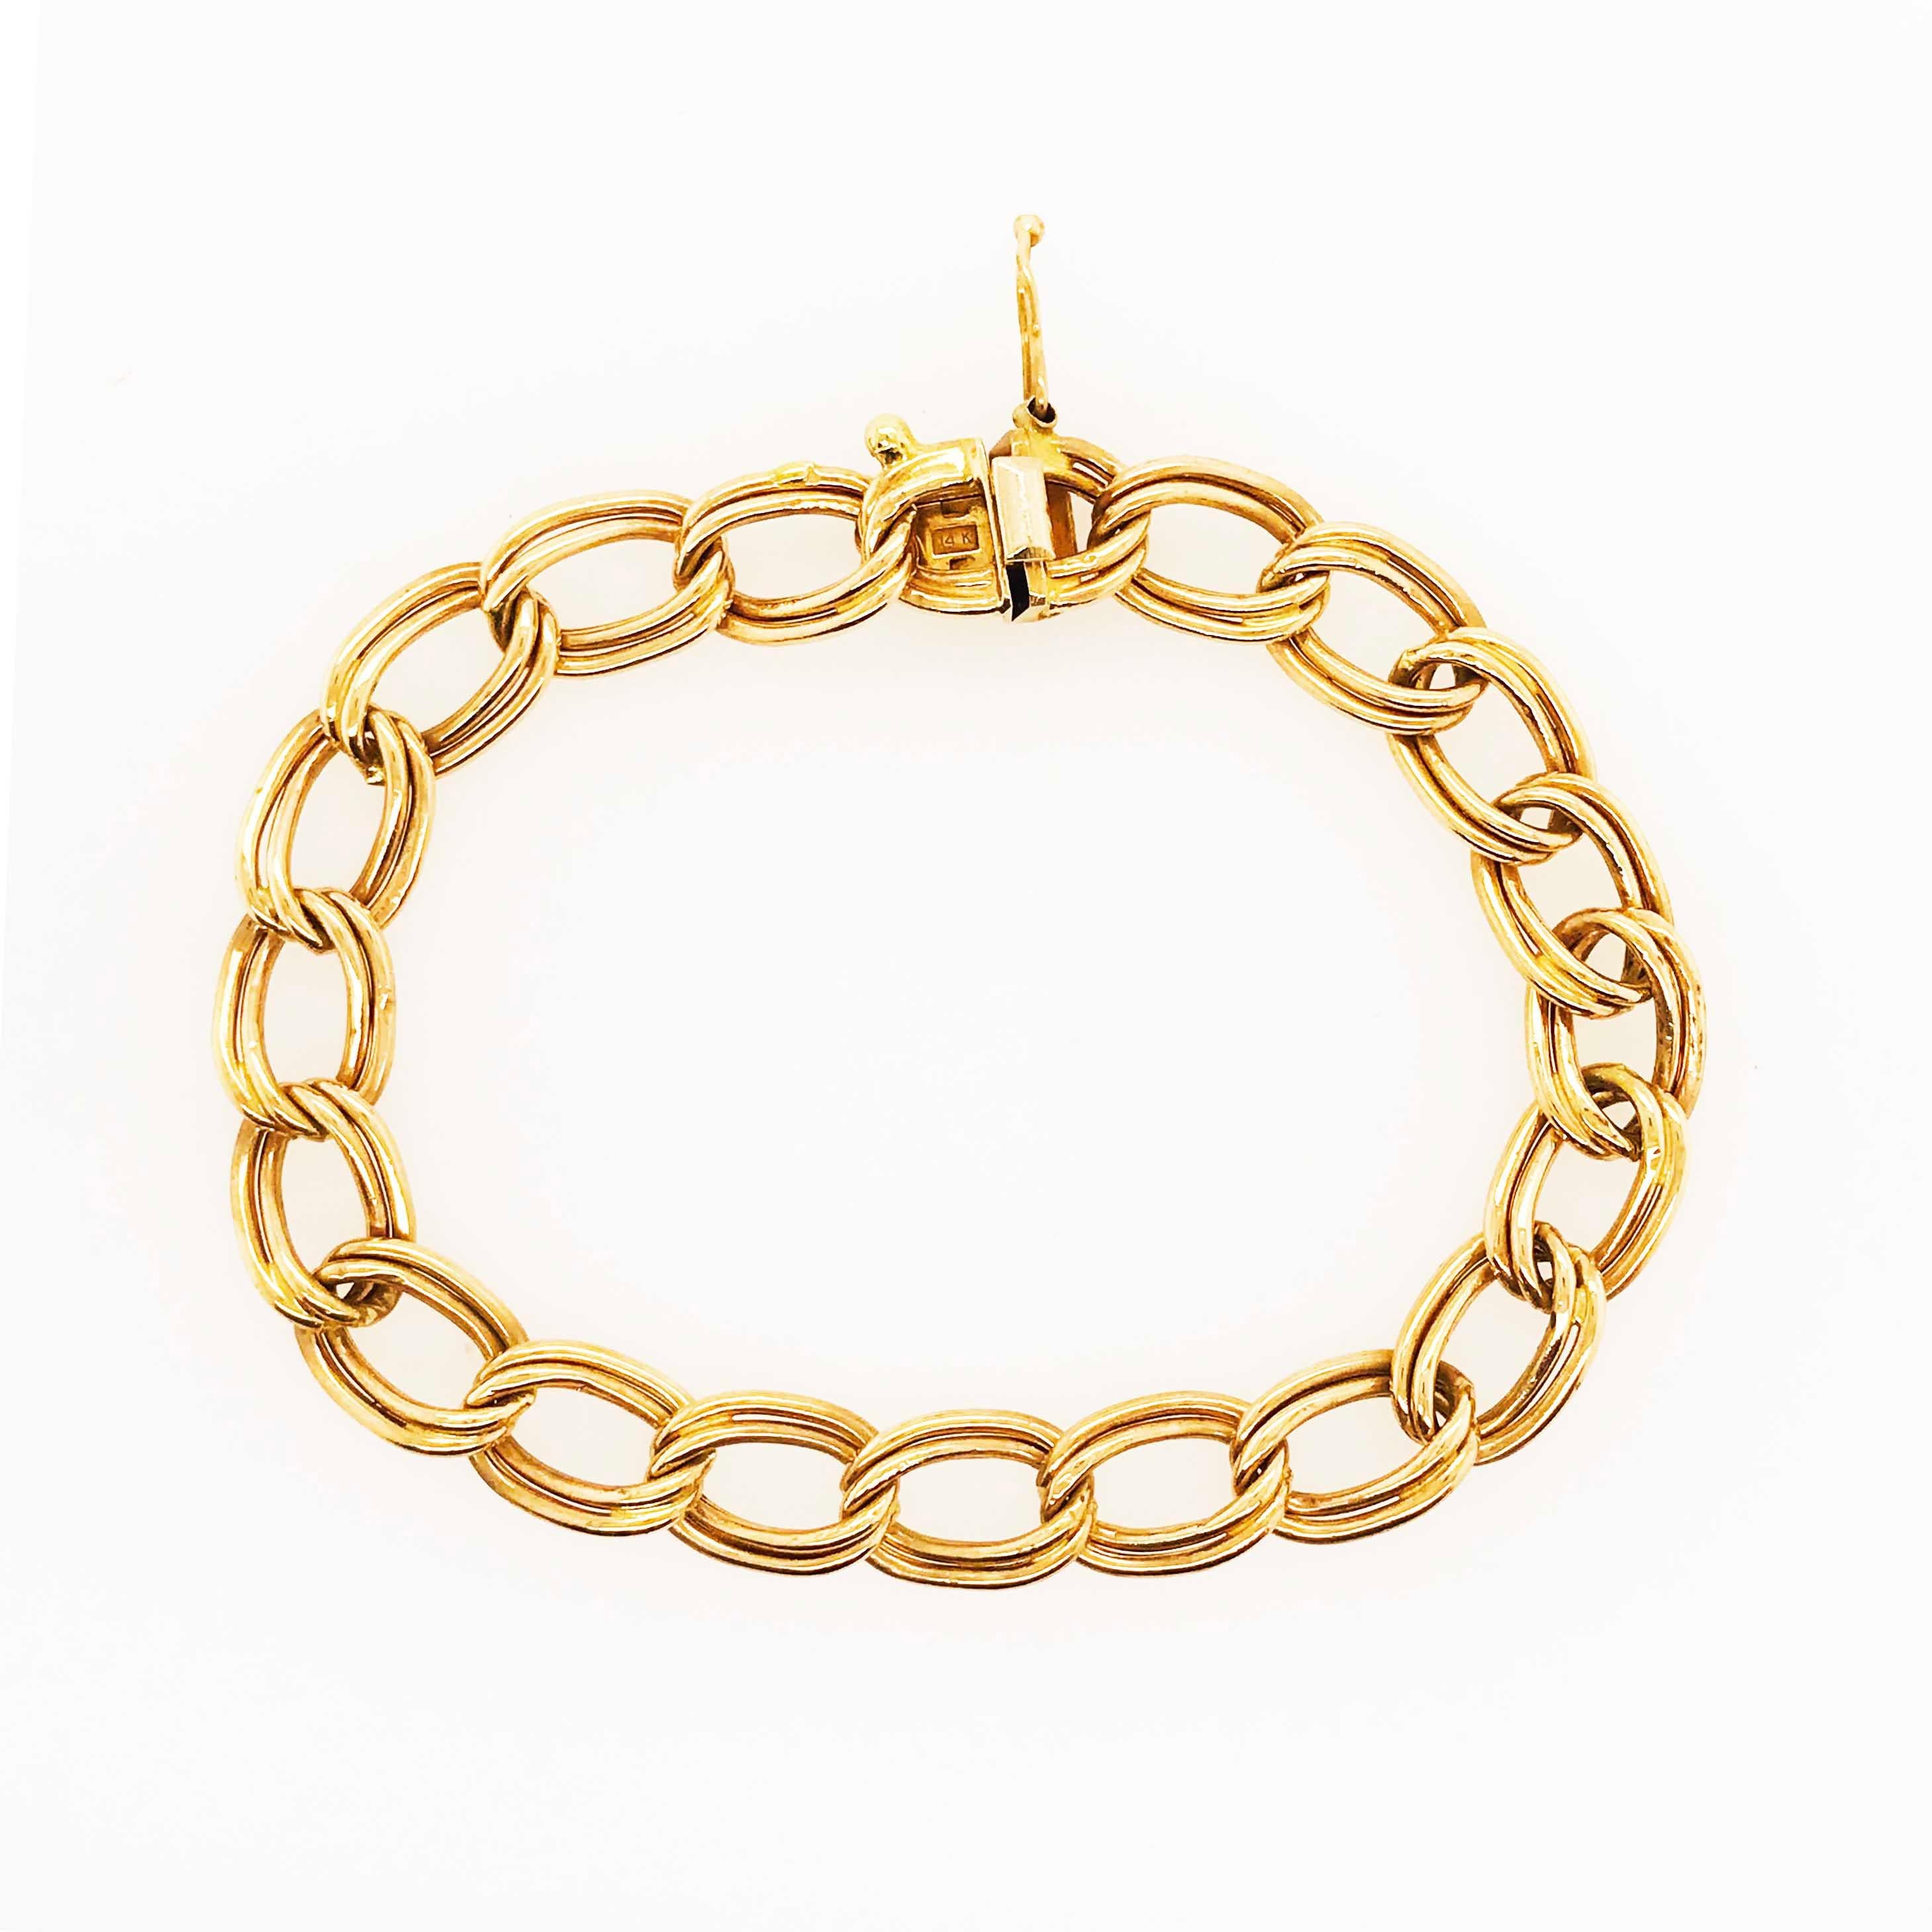 This retro 1979 charm bracelet is made of solid 14 karat yellow gold.  It is perfect for putting charms on or to wear it by itself or accompanying other bracelets.  The bracelet is 7 inches long and approximately 1/2 wide and also has a really cool,